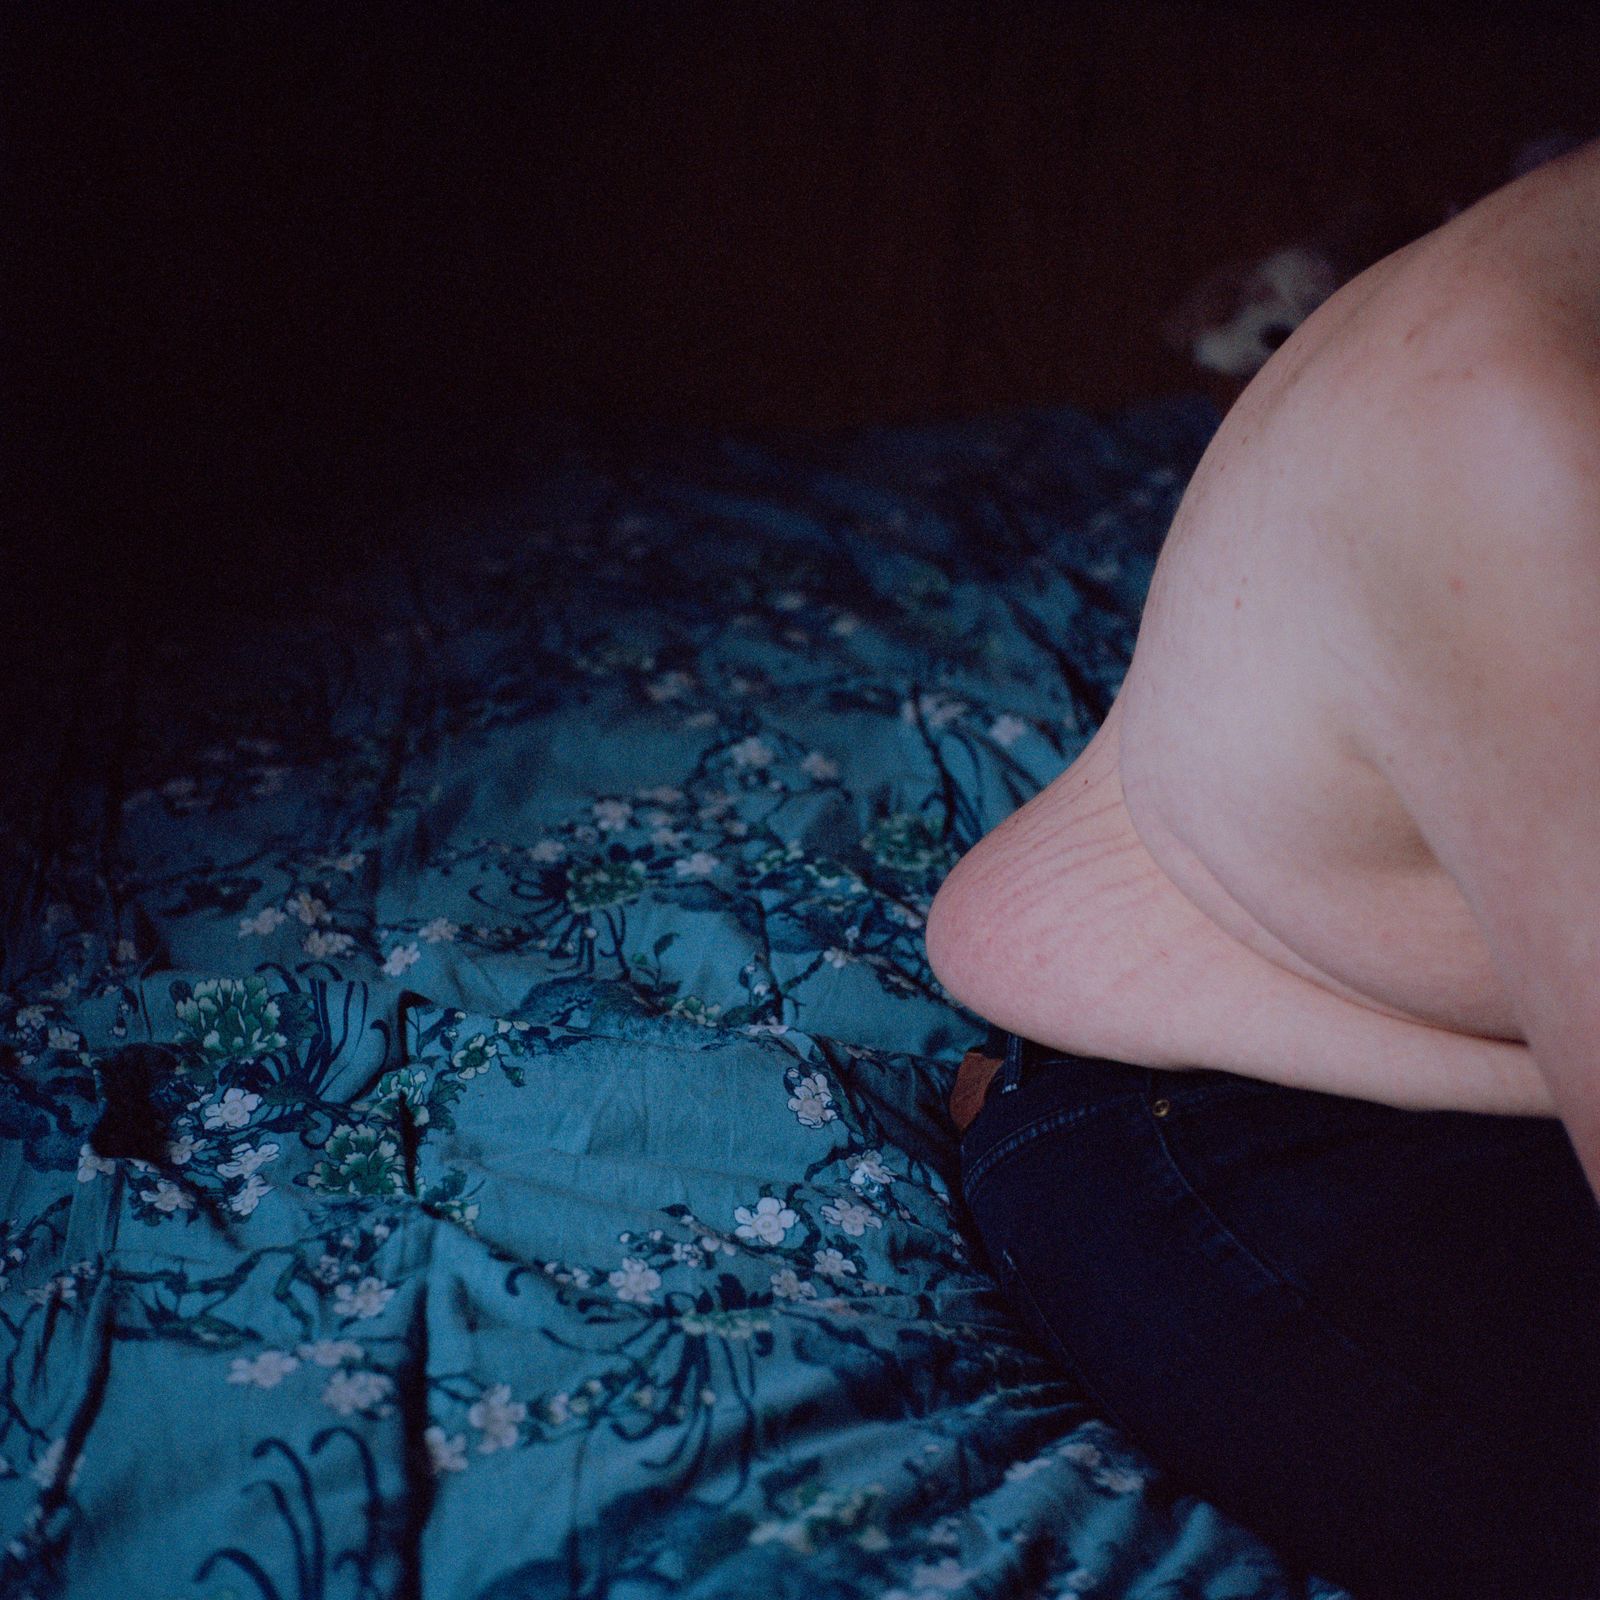 © Nanna Navntoft - Image from the BED photography project